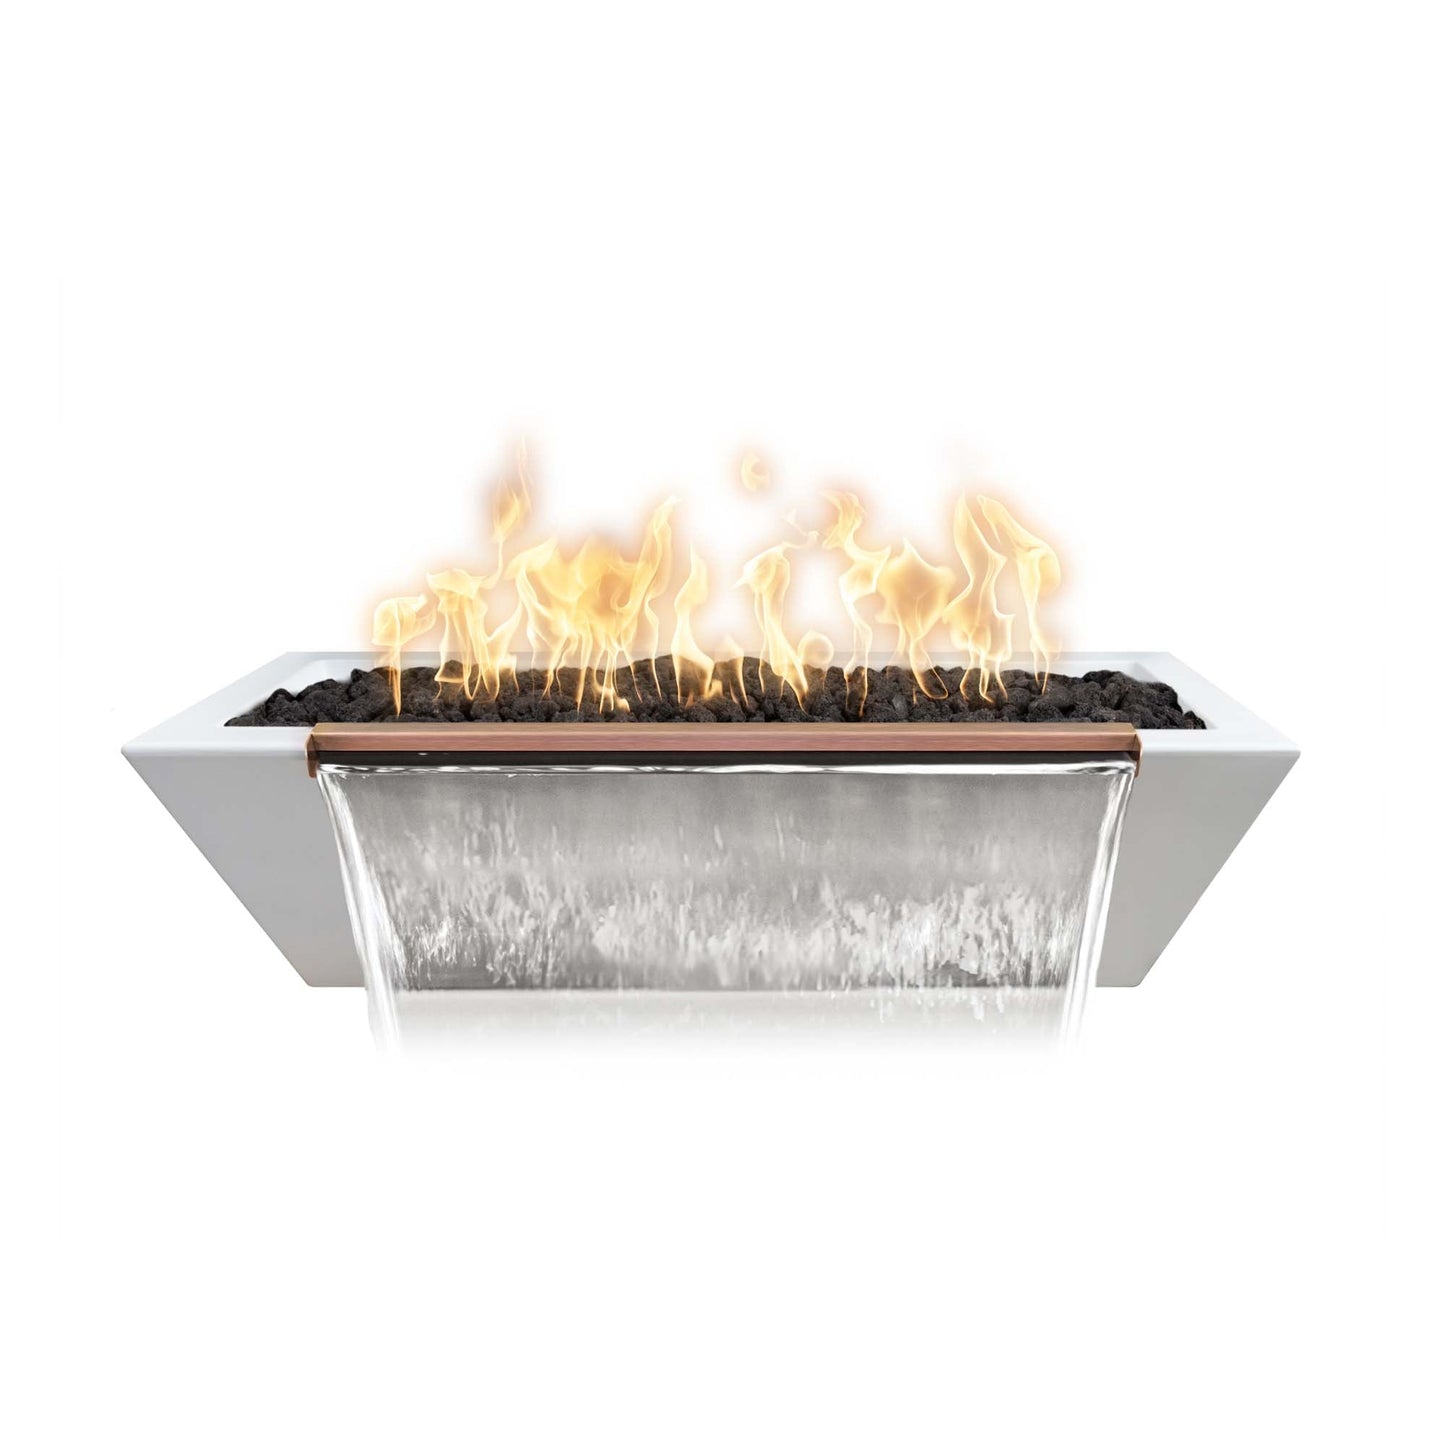 The Outdoor Plus Linear Maya 72" Chocolate GFRC Concrete Liquid Propane Fire & Water Bowl with Match Lit with Flame Sense Ignition